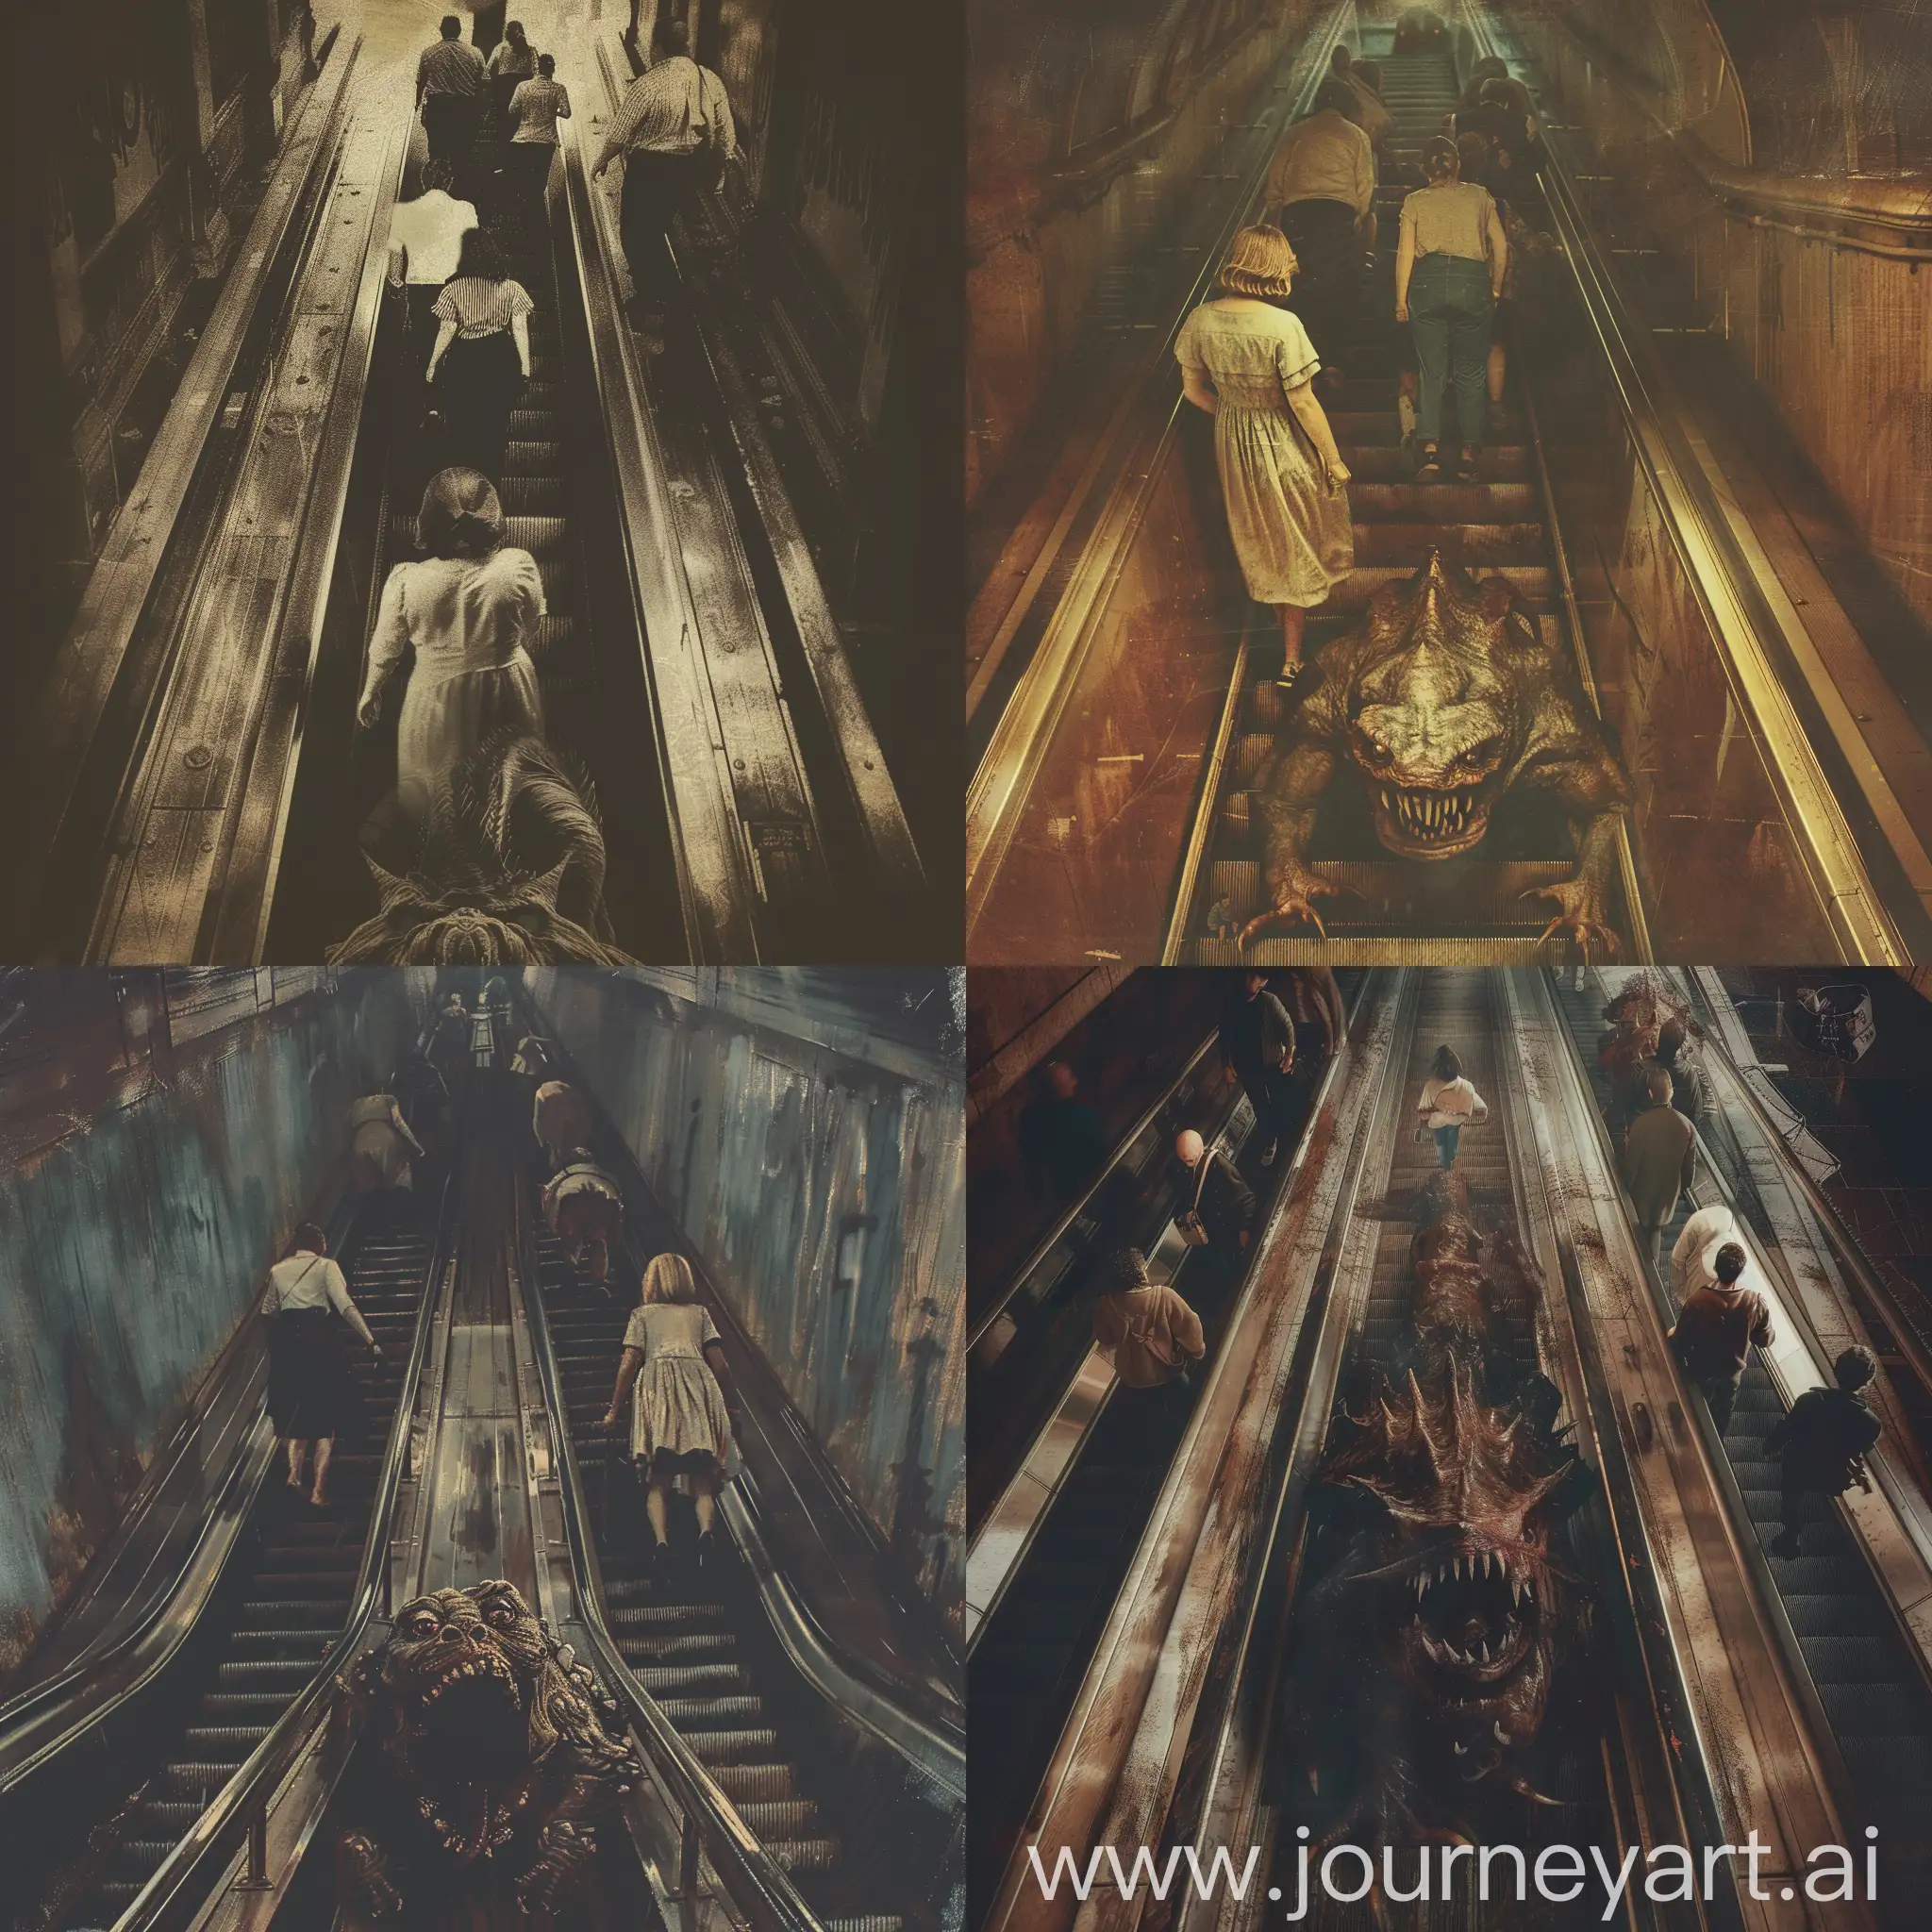 People going downwards on an old fashioned wooden escalator at a subway station. At the bottom of the escalator is a horrible scary monster and the people going down the escalator are scared of it. Frightening, disturbing, gothic